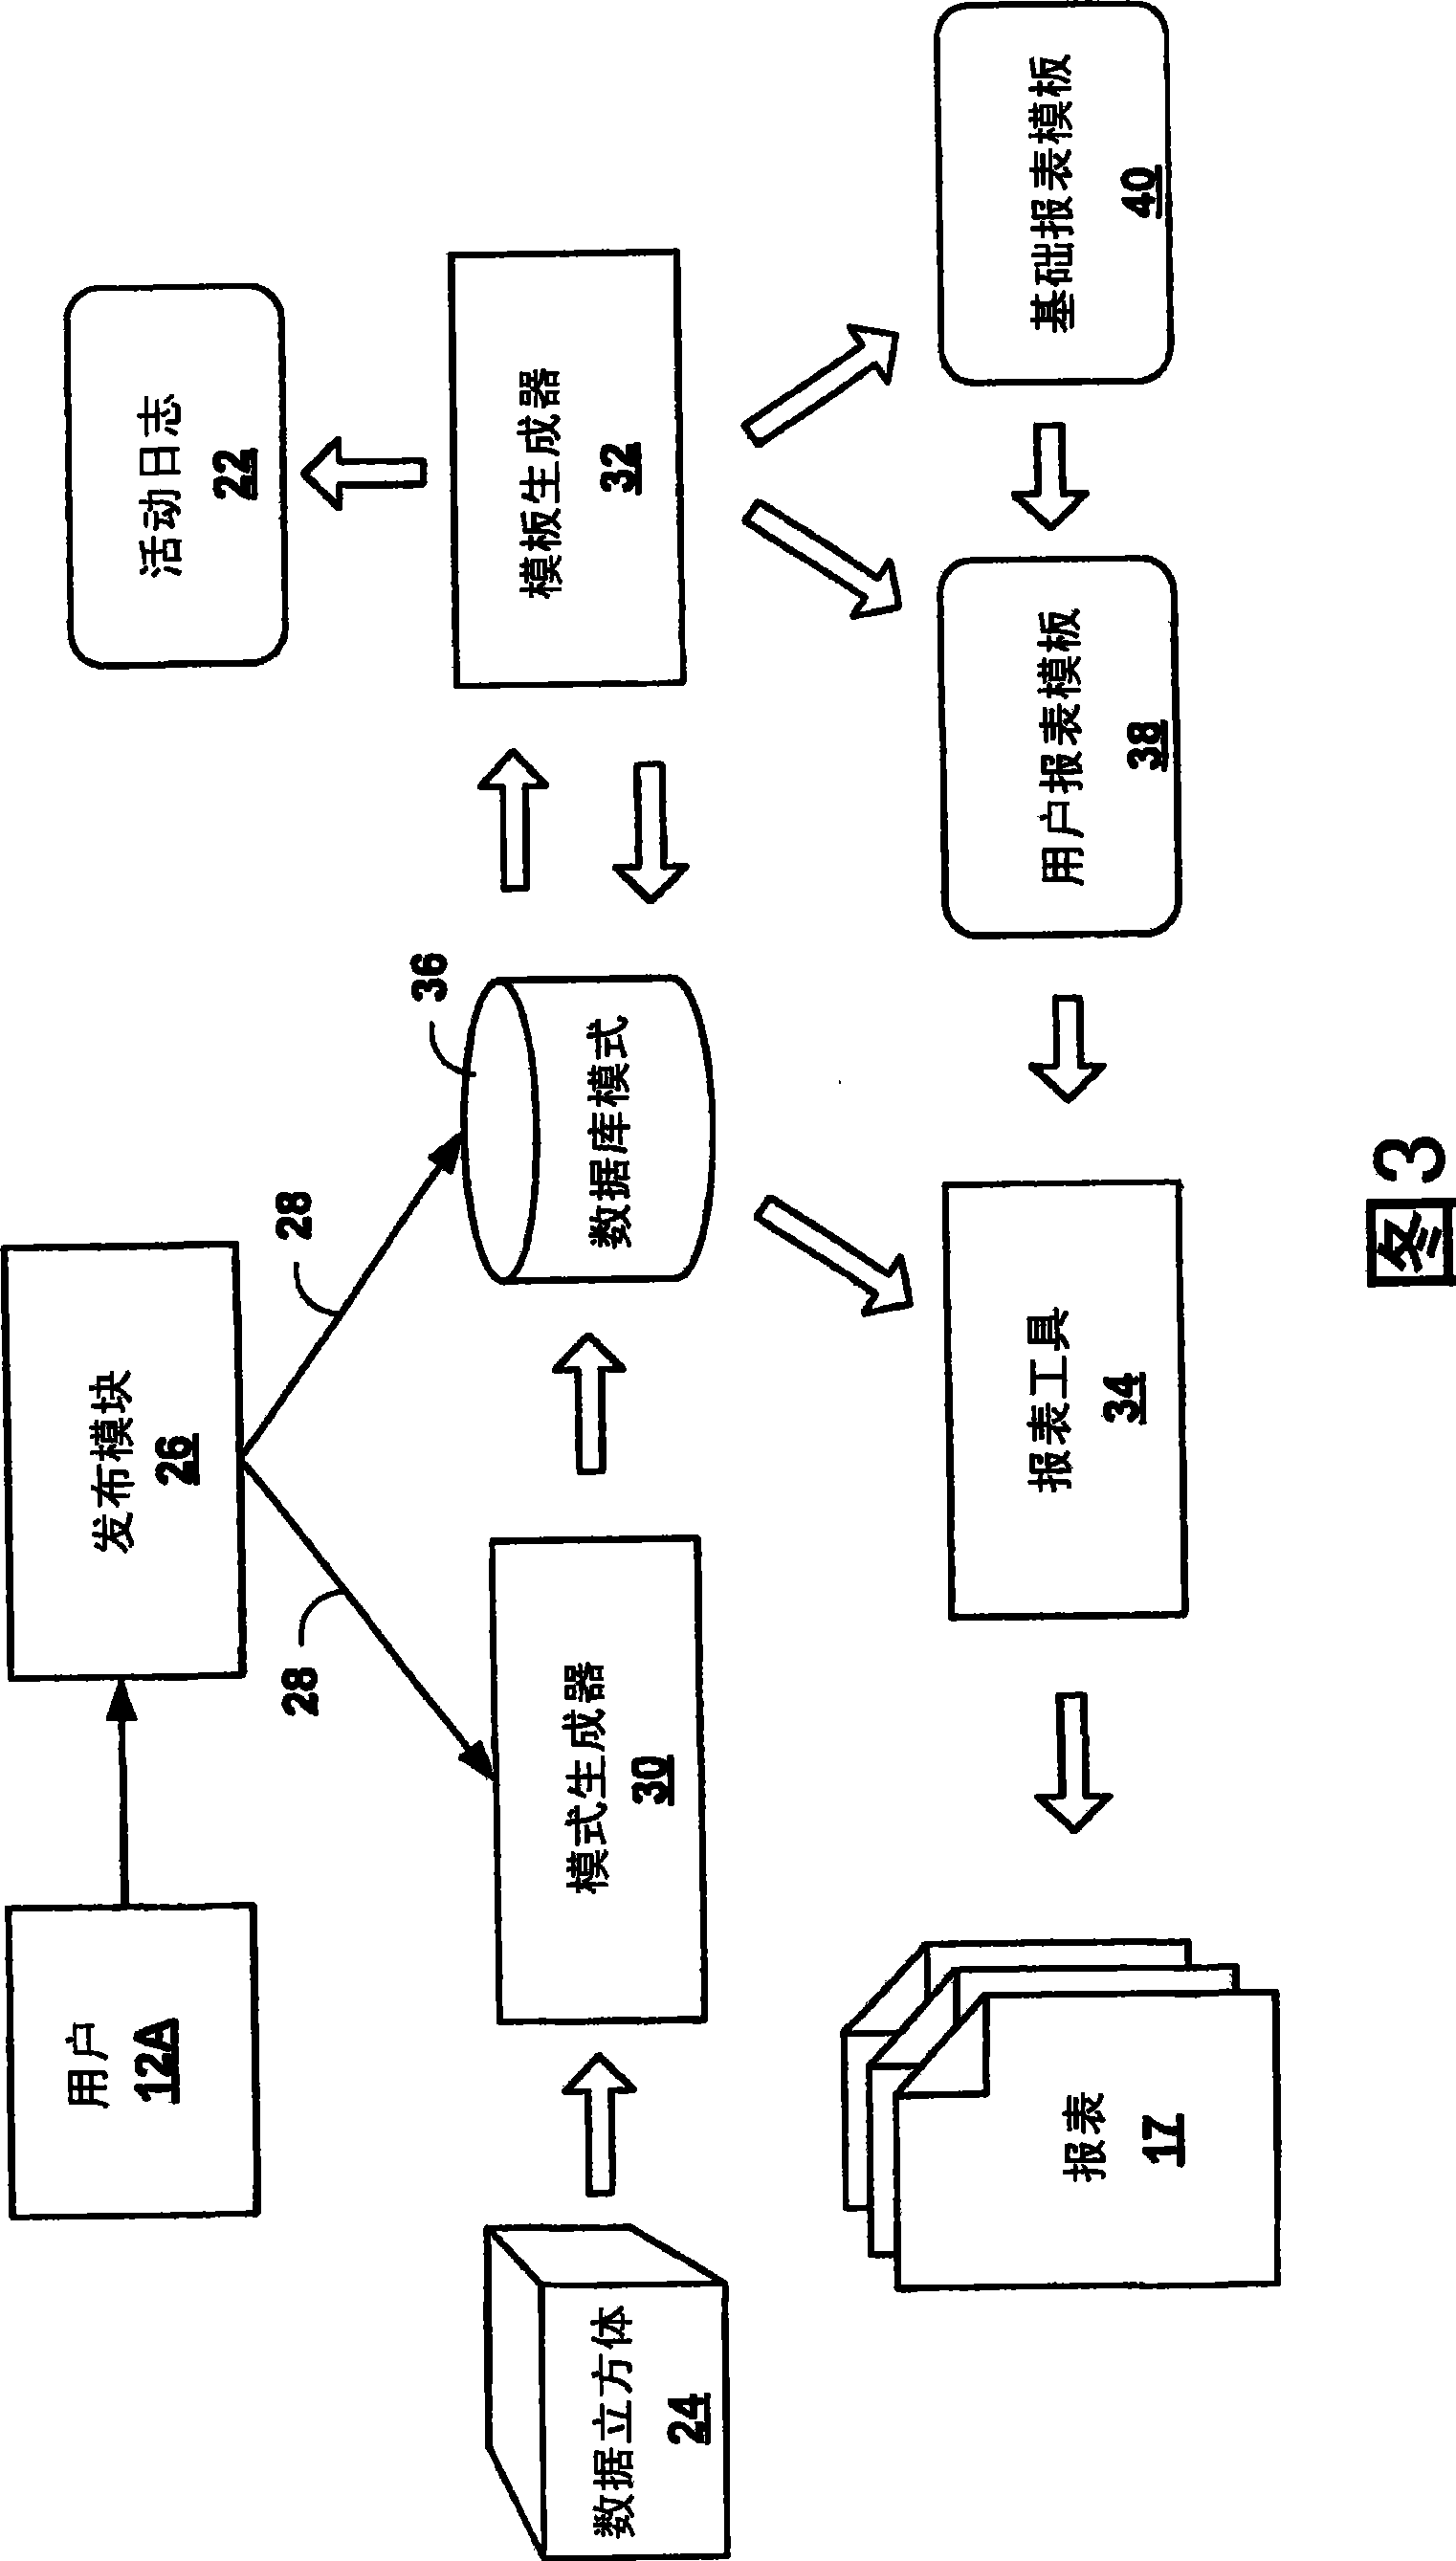 Automated relational schema generation within a multidimensional enterprise software system